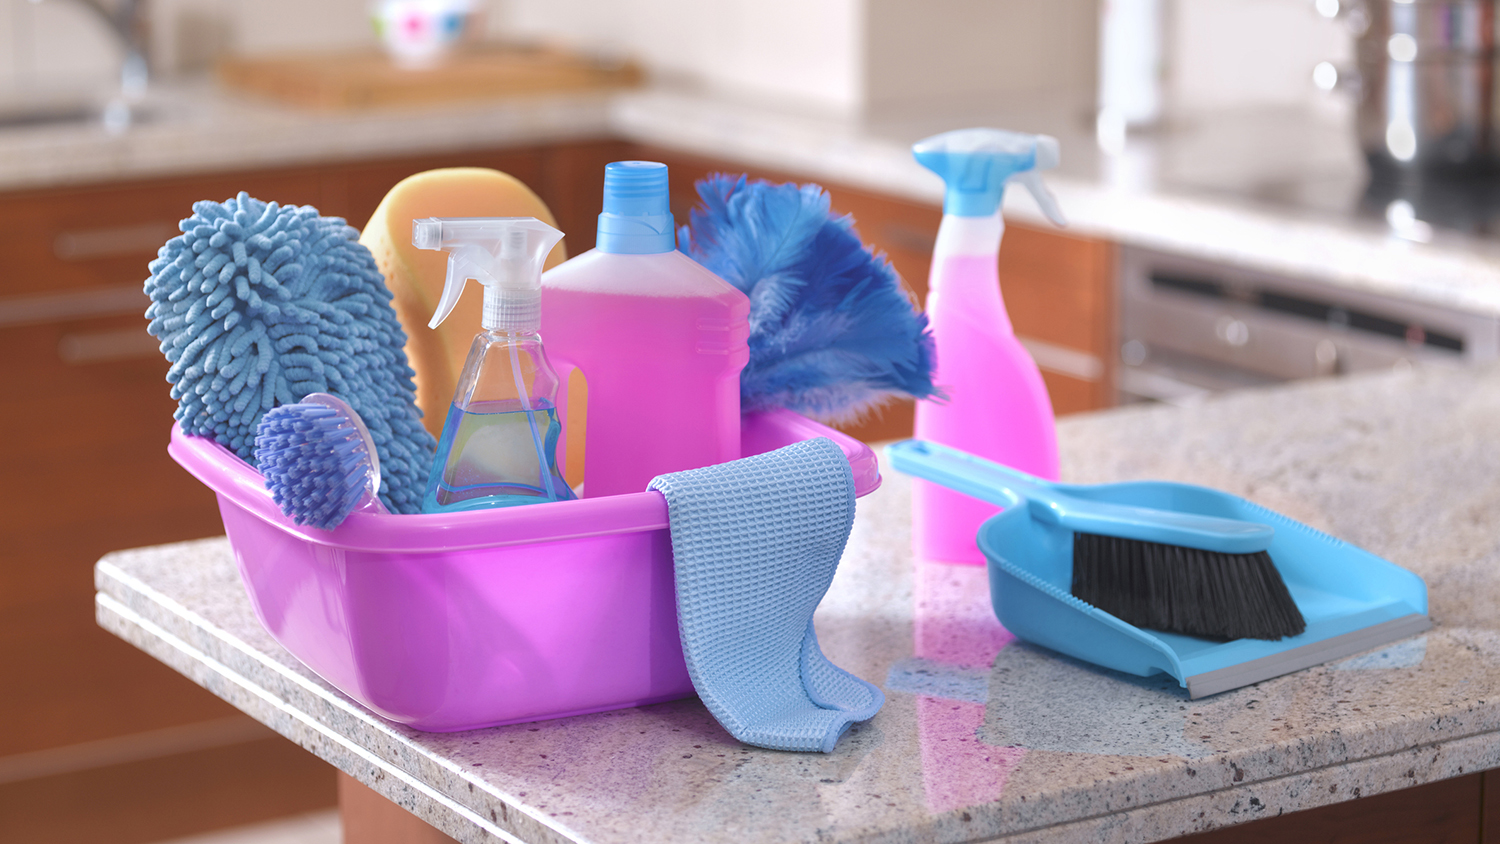 5 Hands-Free Ways to Clean Your Home's Ickiest Spots